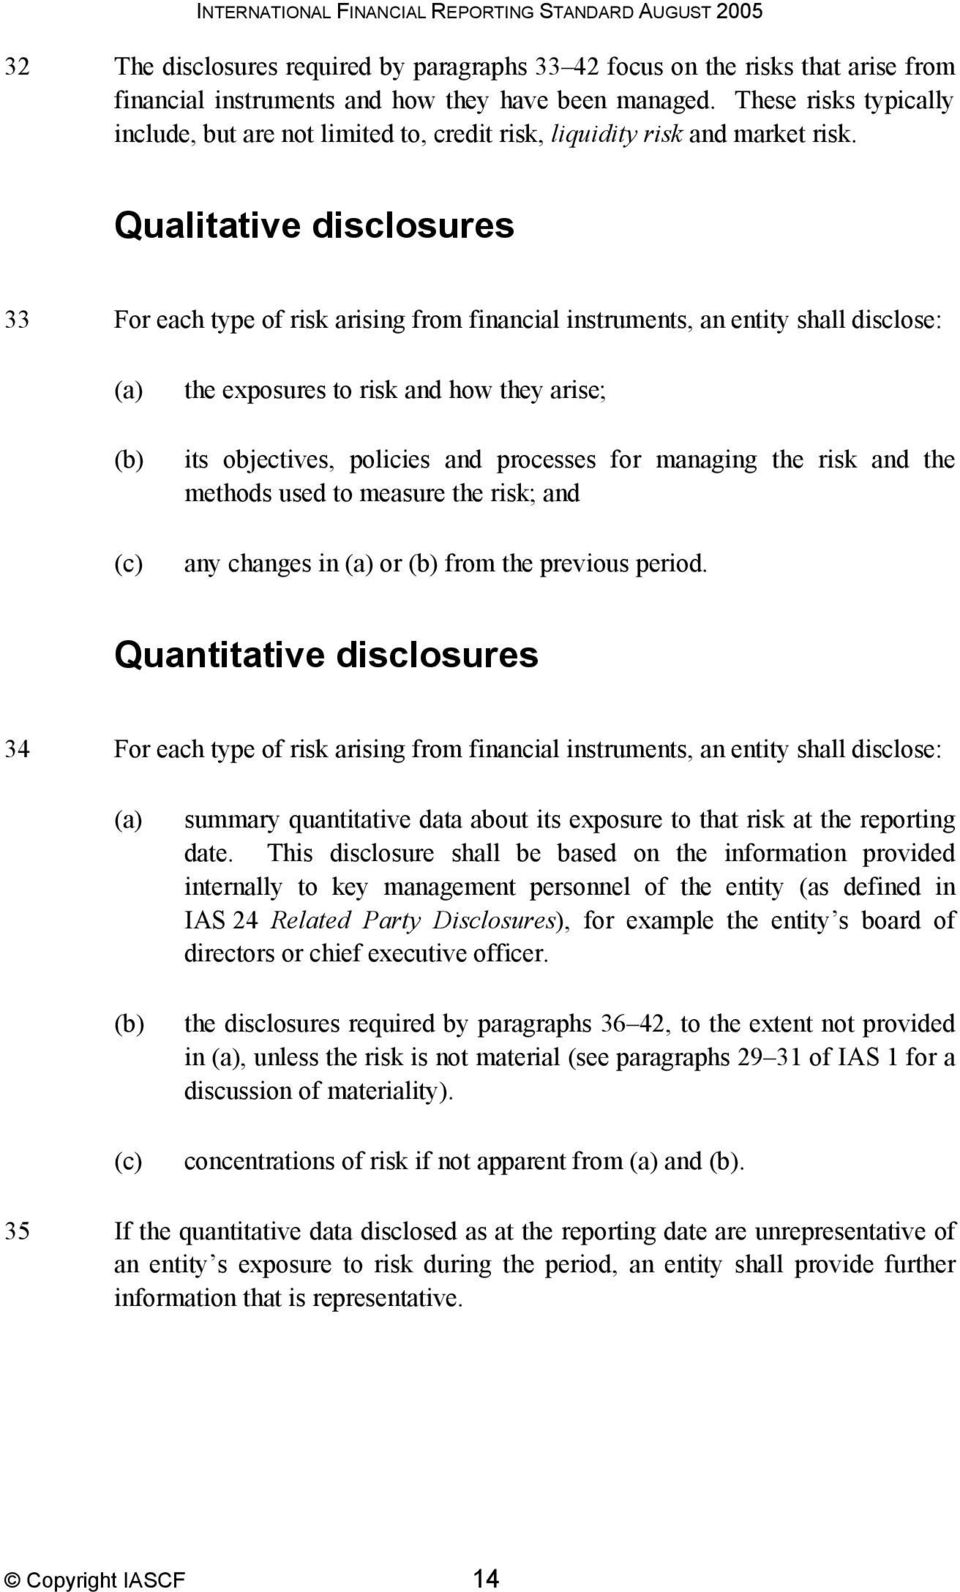 Qualitative disclosures 33 For each type of risk arising from financial instruments, an entity shall disclose: the exposures to risk and how they arise; its objectives, policies and processes for